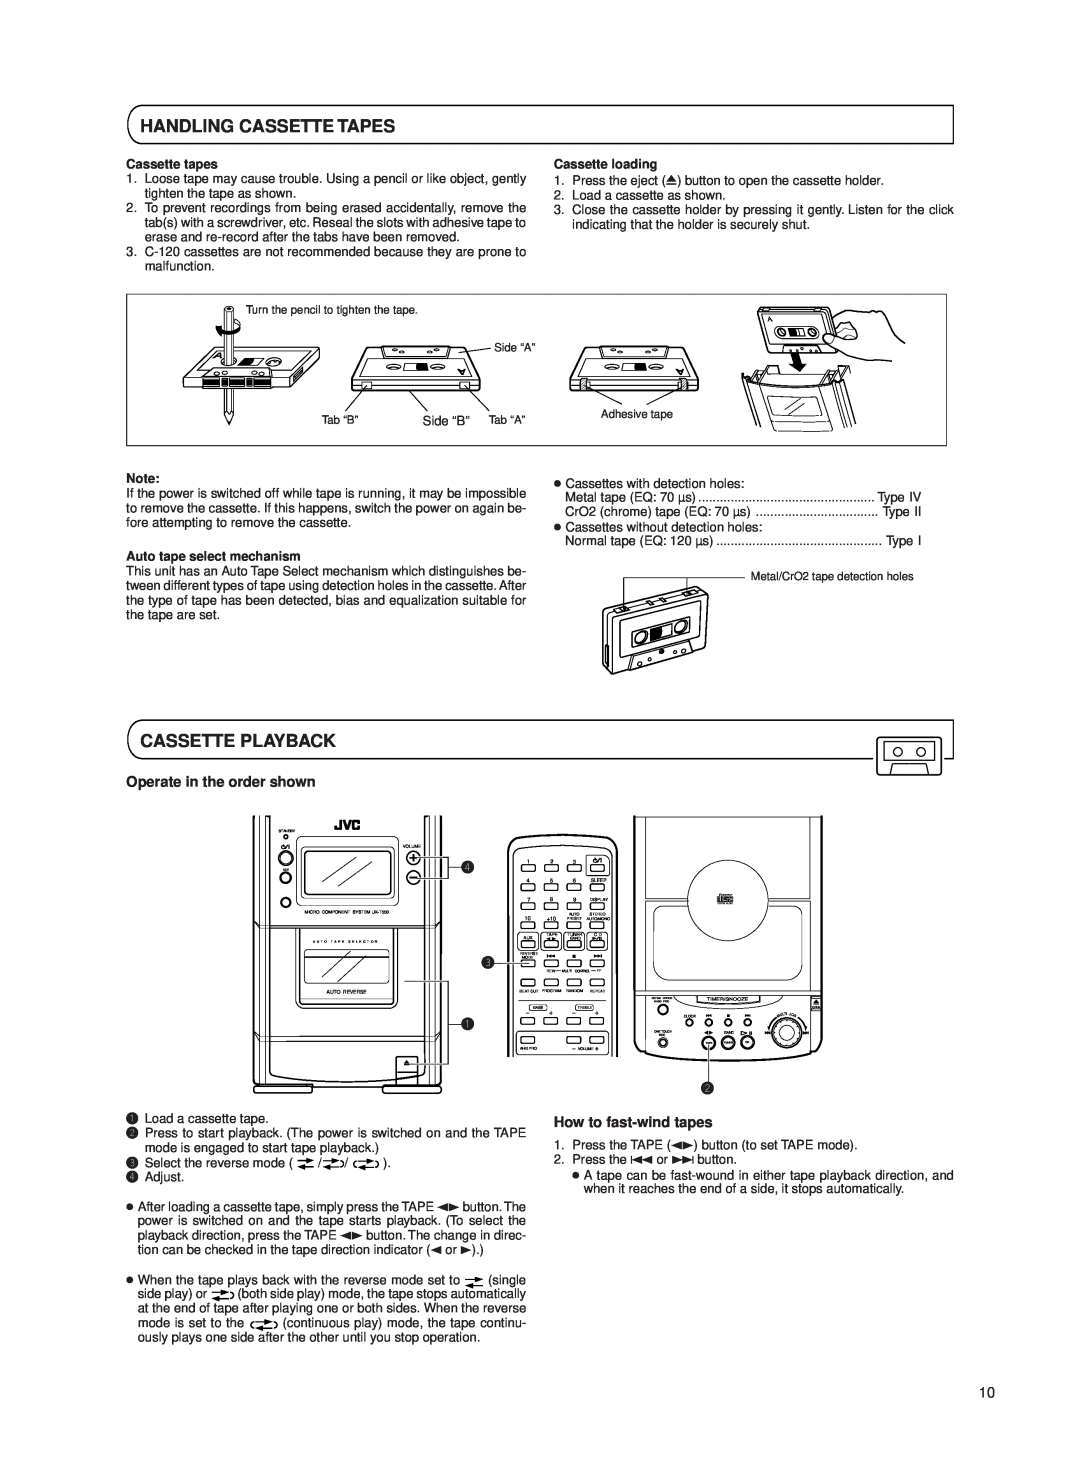 JVC UX-T550 Handling Cassette Tapes, Cassette Playback, Operate in the order shown, How to fast-windtapes, Cassette tapes 